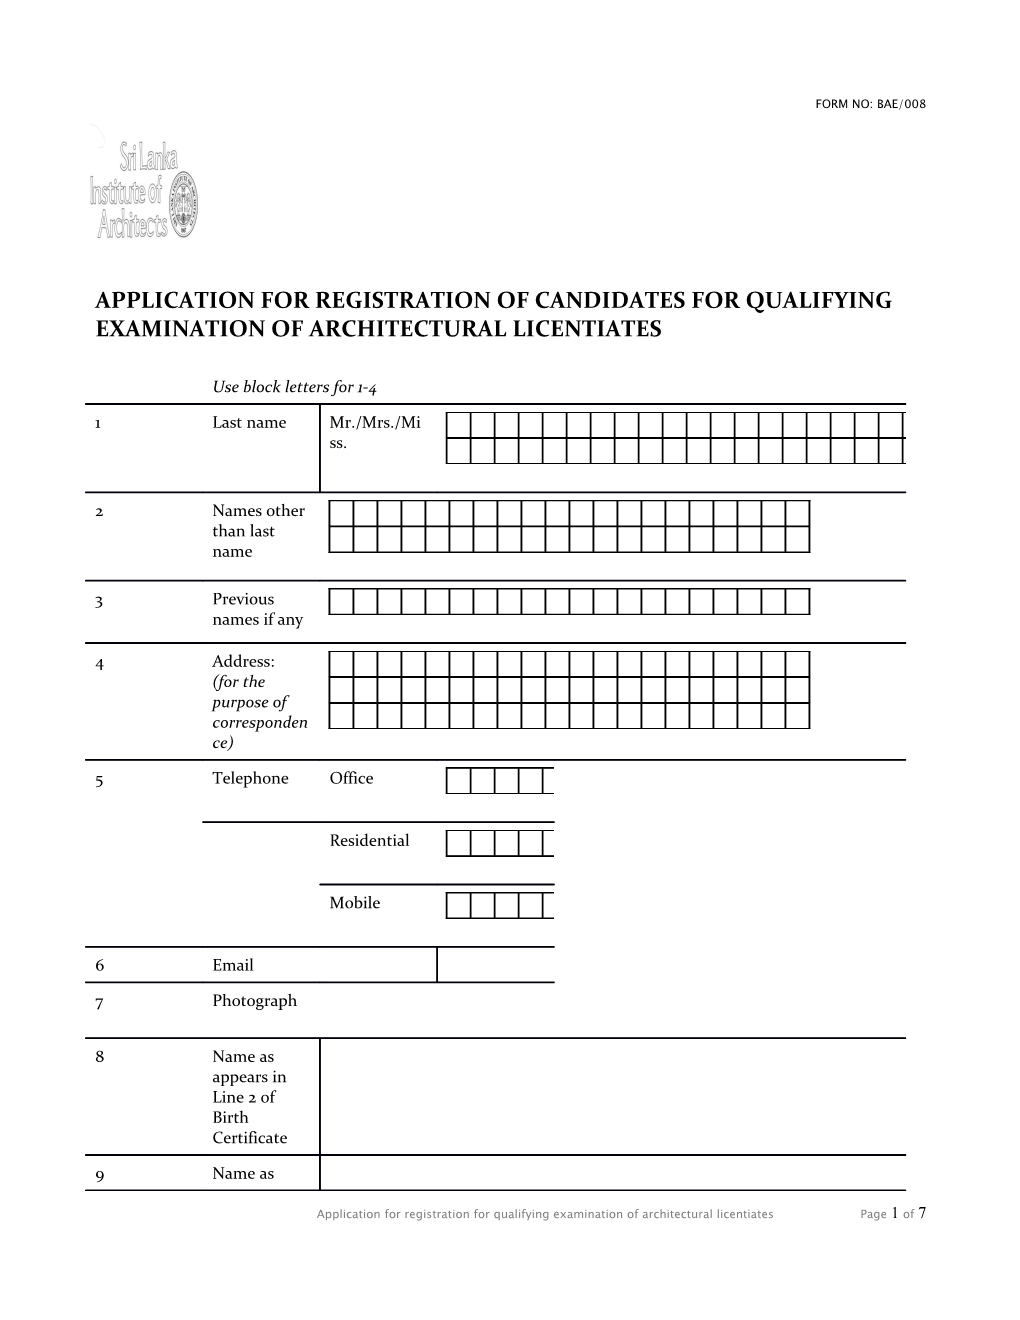 Application for Registration for Qualifying Examination of Architectural Licentiates Page 1 of 5